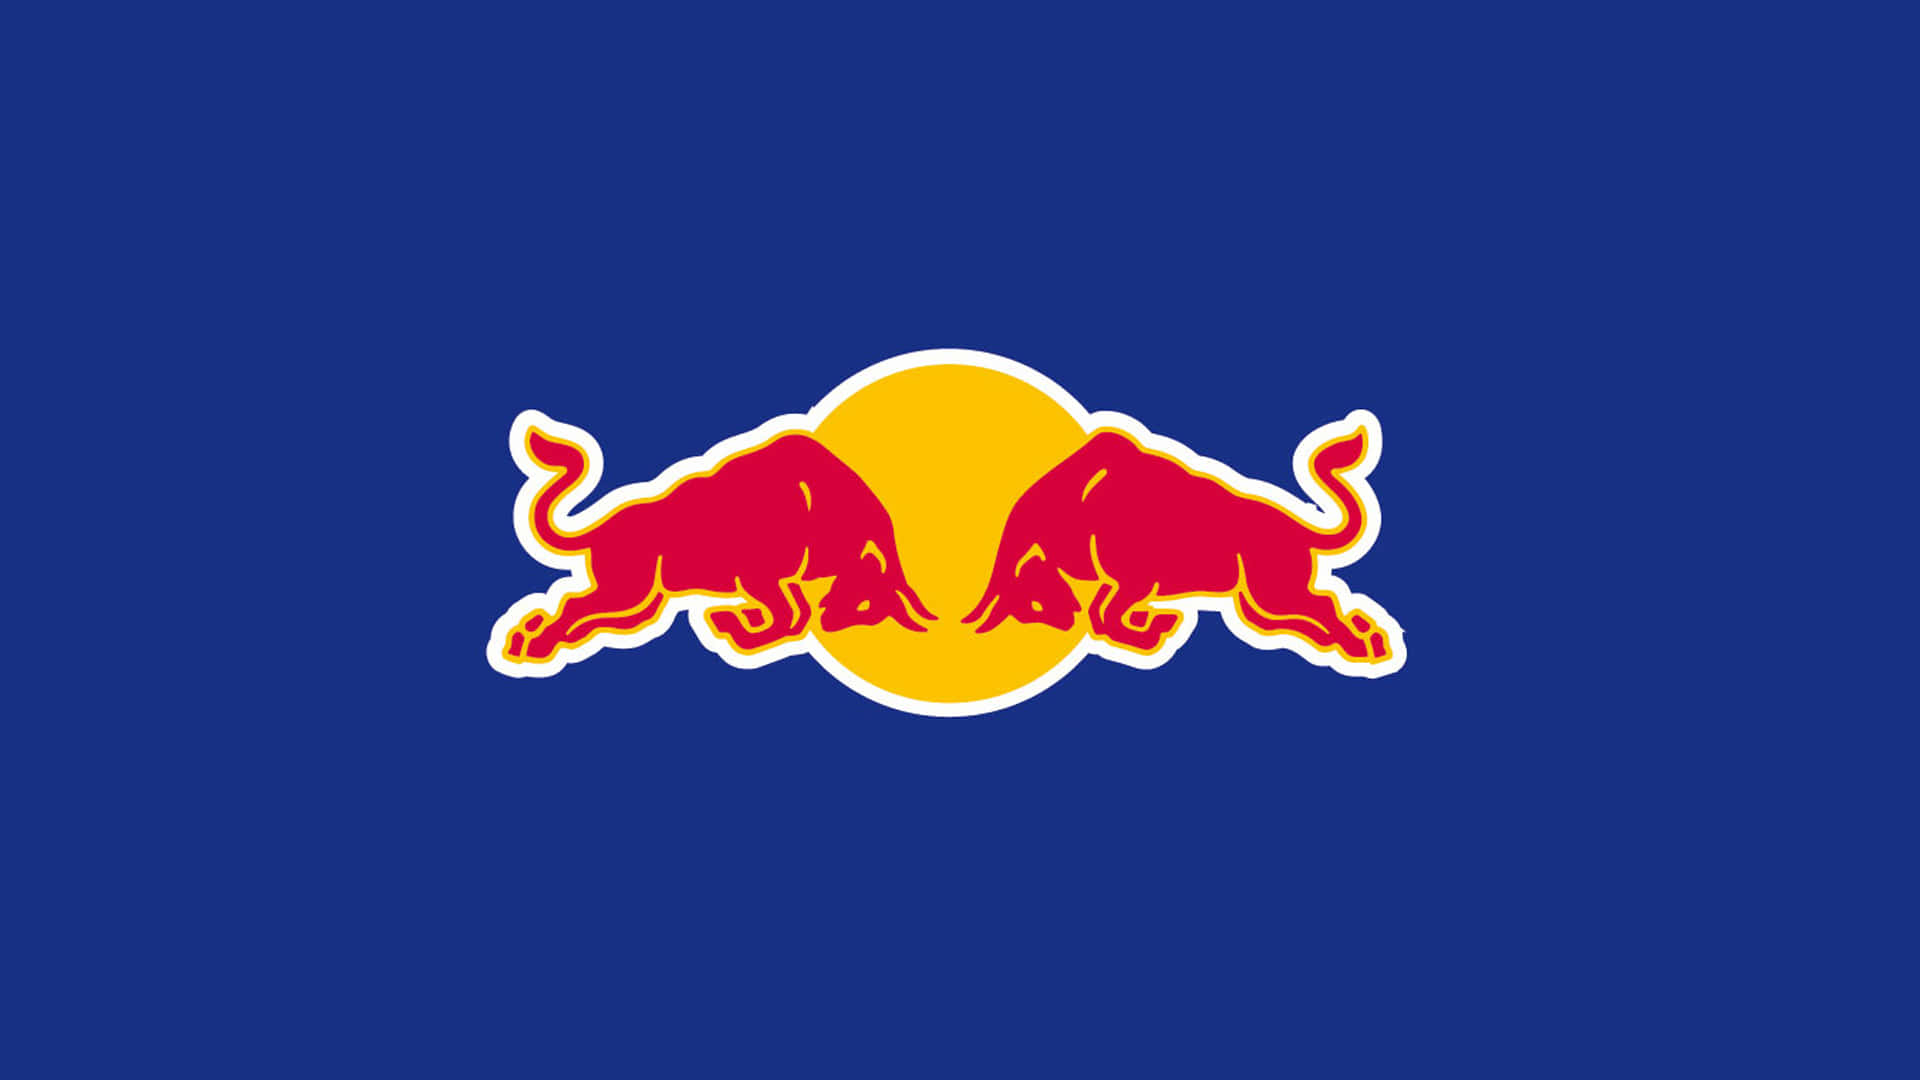 Reenergize with Red Bull